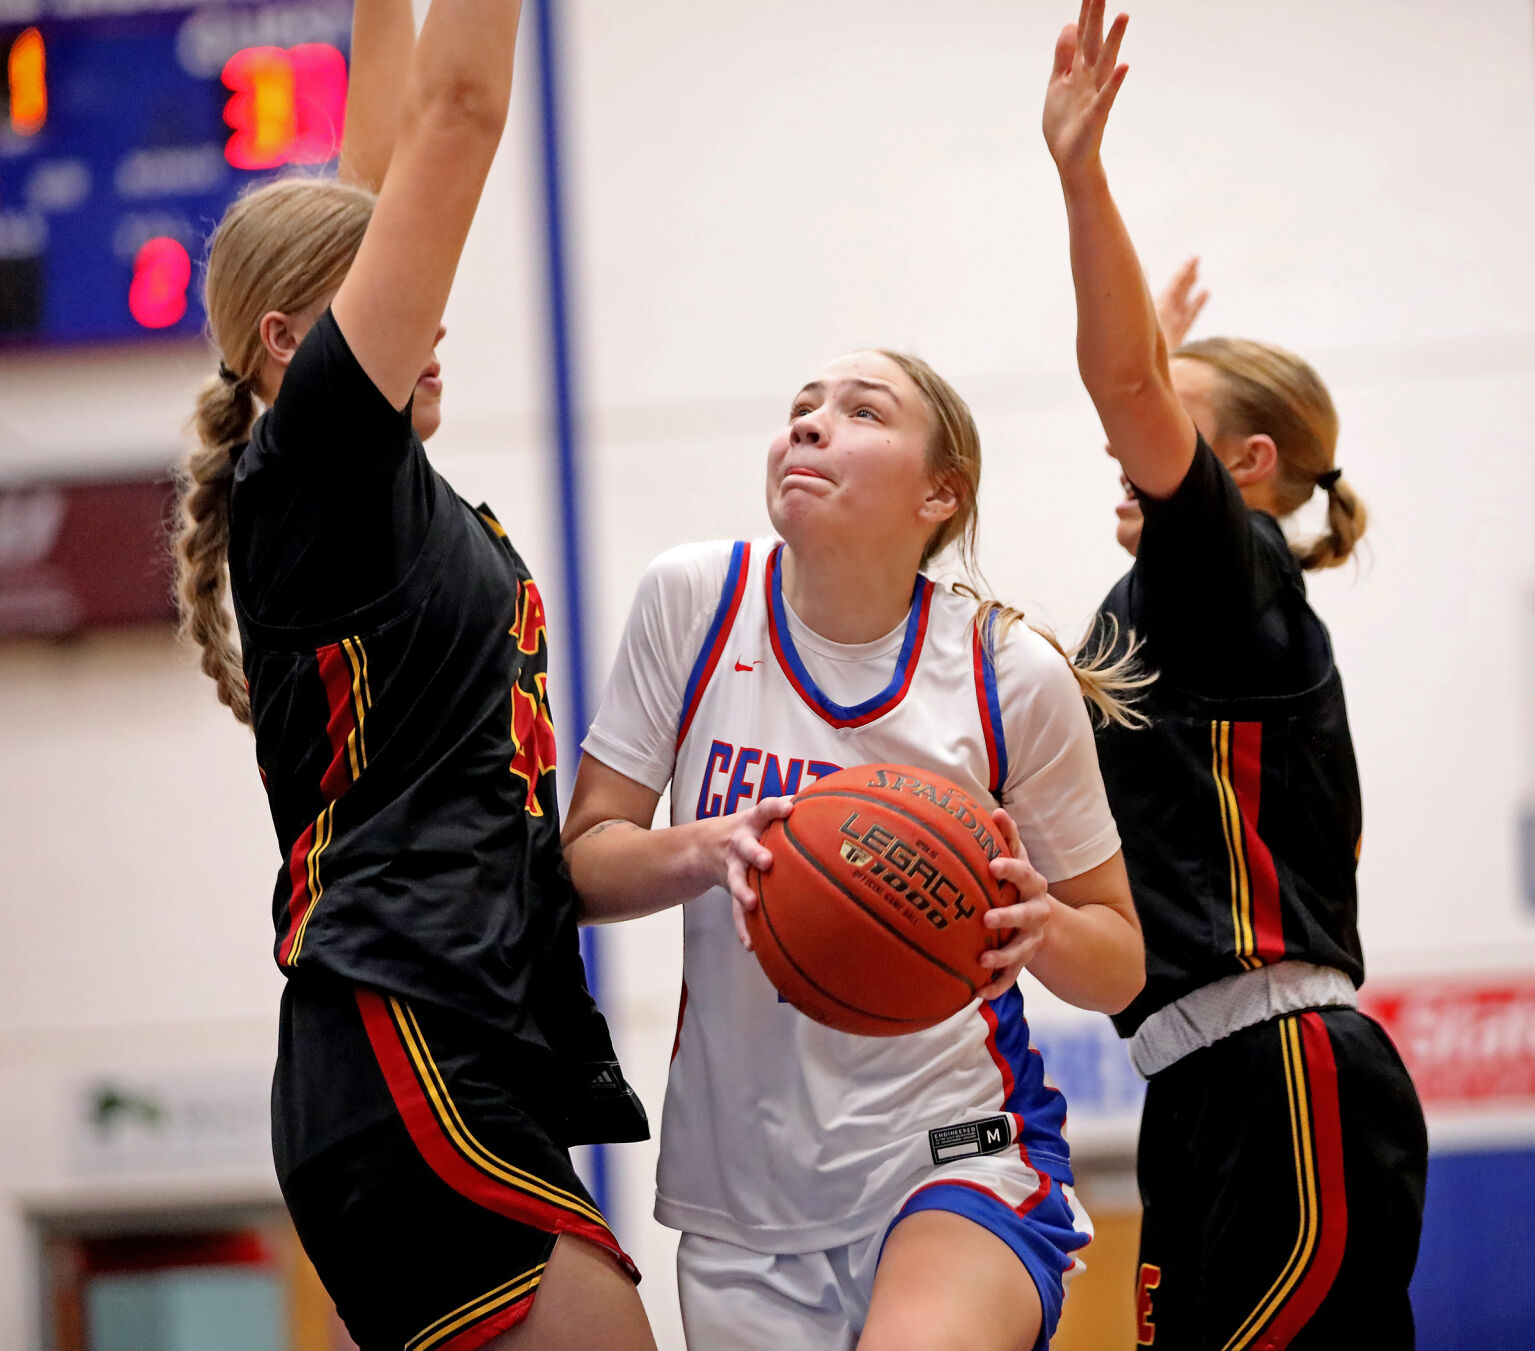 Madison Central Lady Indians rally with big fourth quarter to defeat Bullitt East, Model Lady Patriots extend winning streak, Madison Southern Eagles secure a hard-earned win, Madison Southern Lady Eagles fall to Pineville